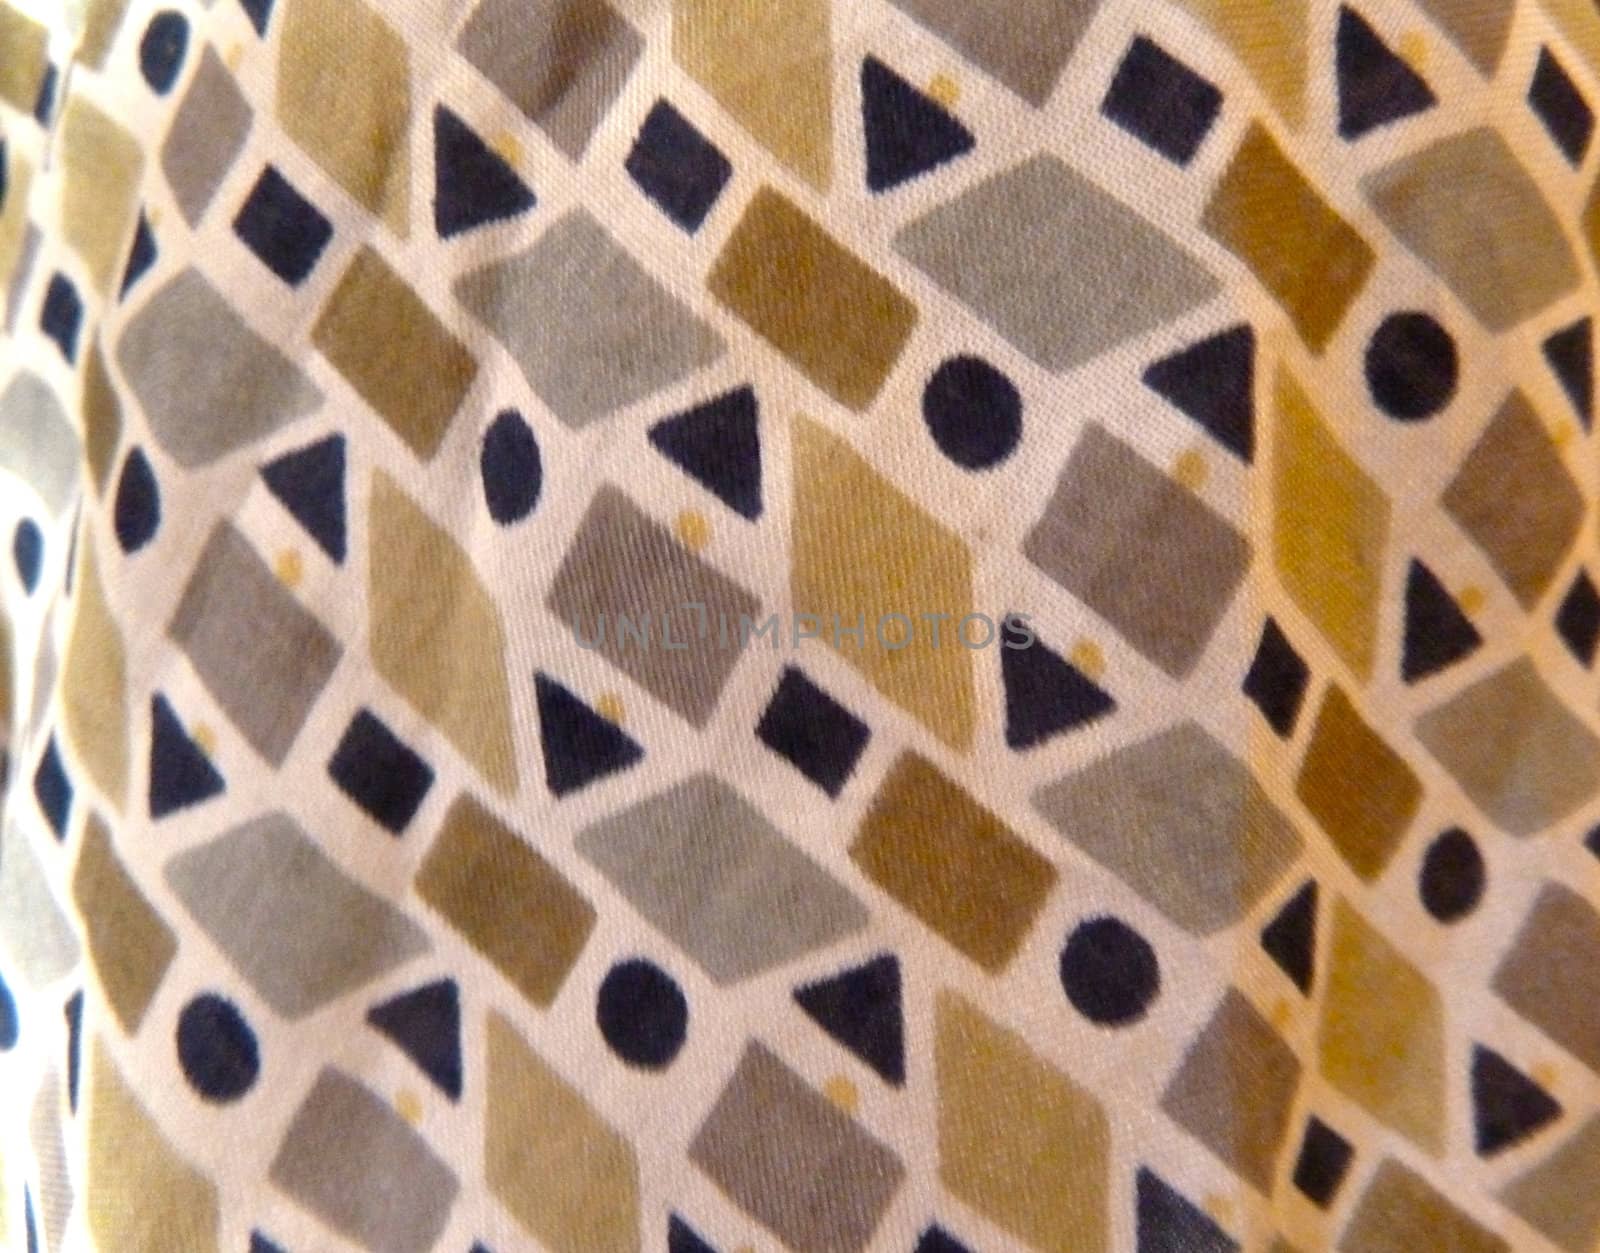 patterned material as a background